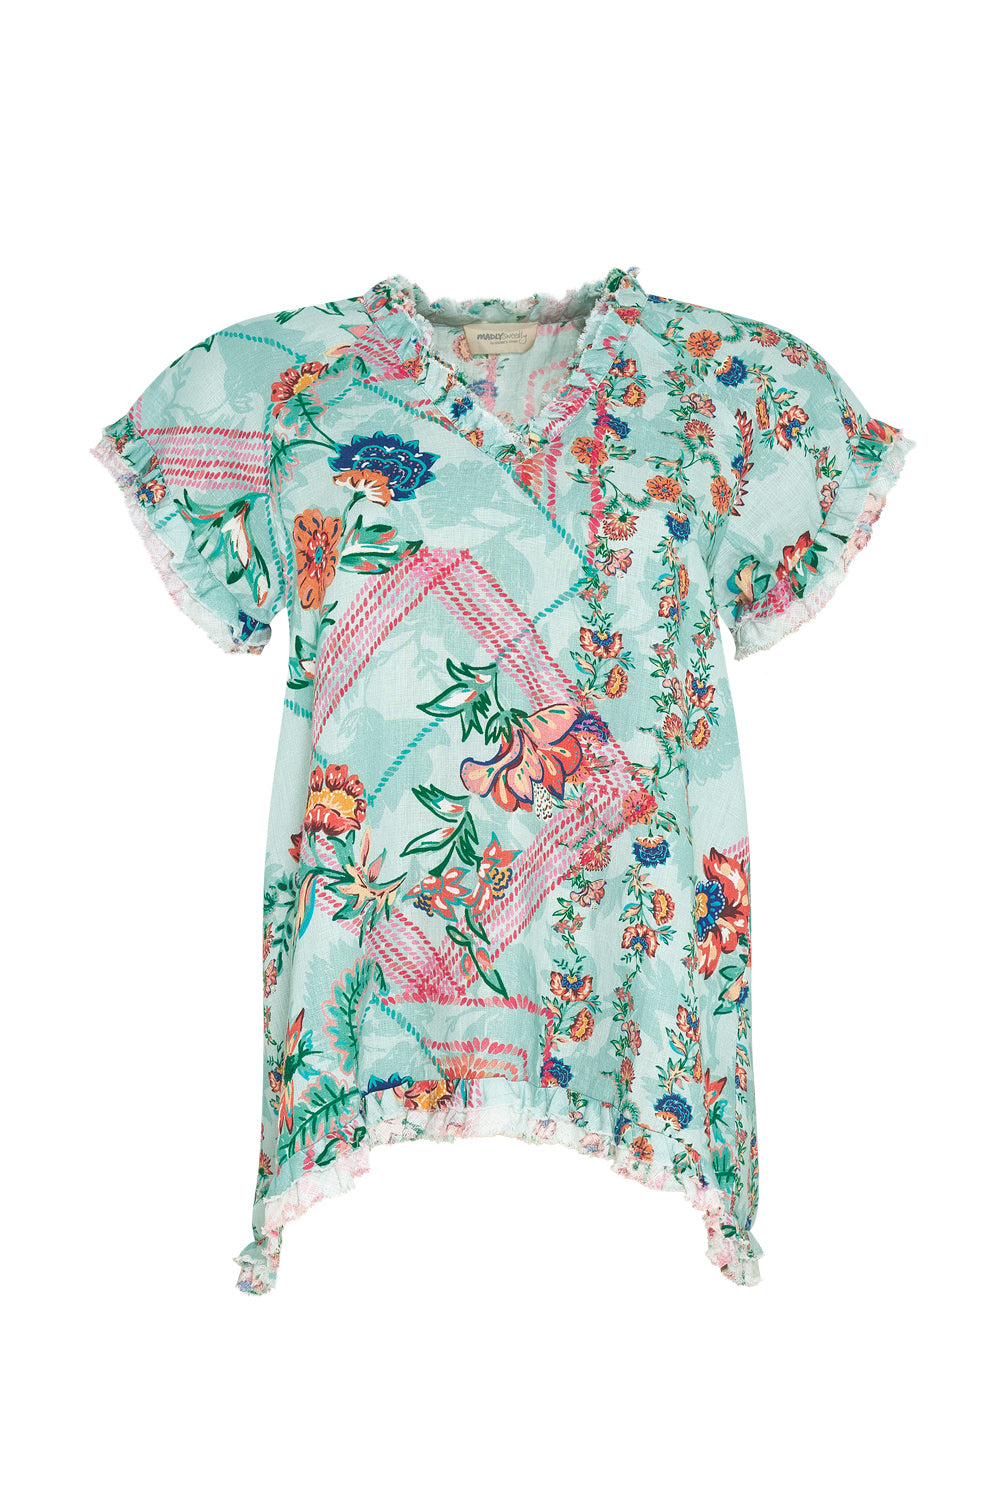 Seas The Day Top by Madly Sweetly – Loobie & Friends